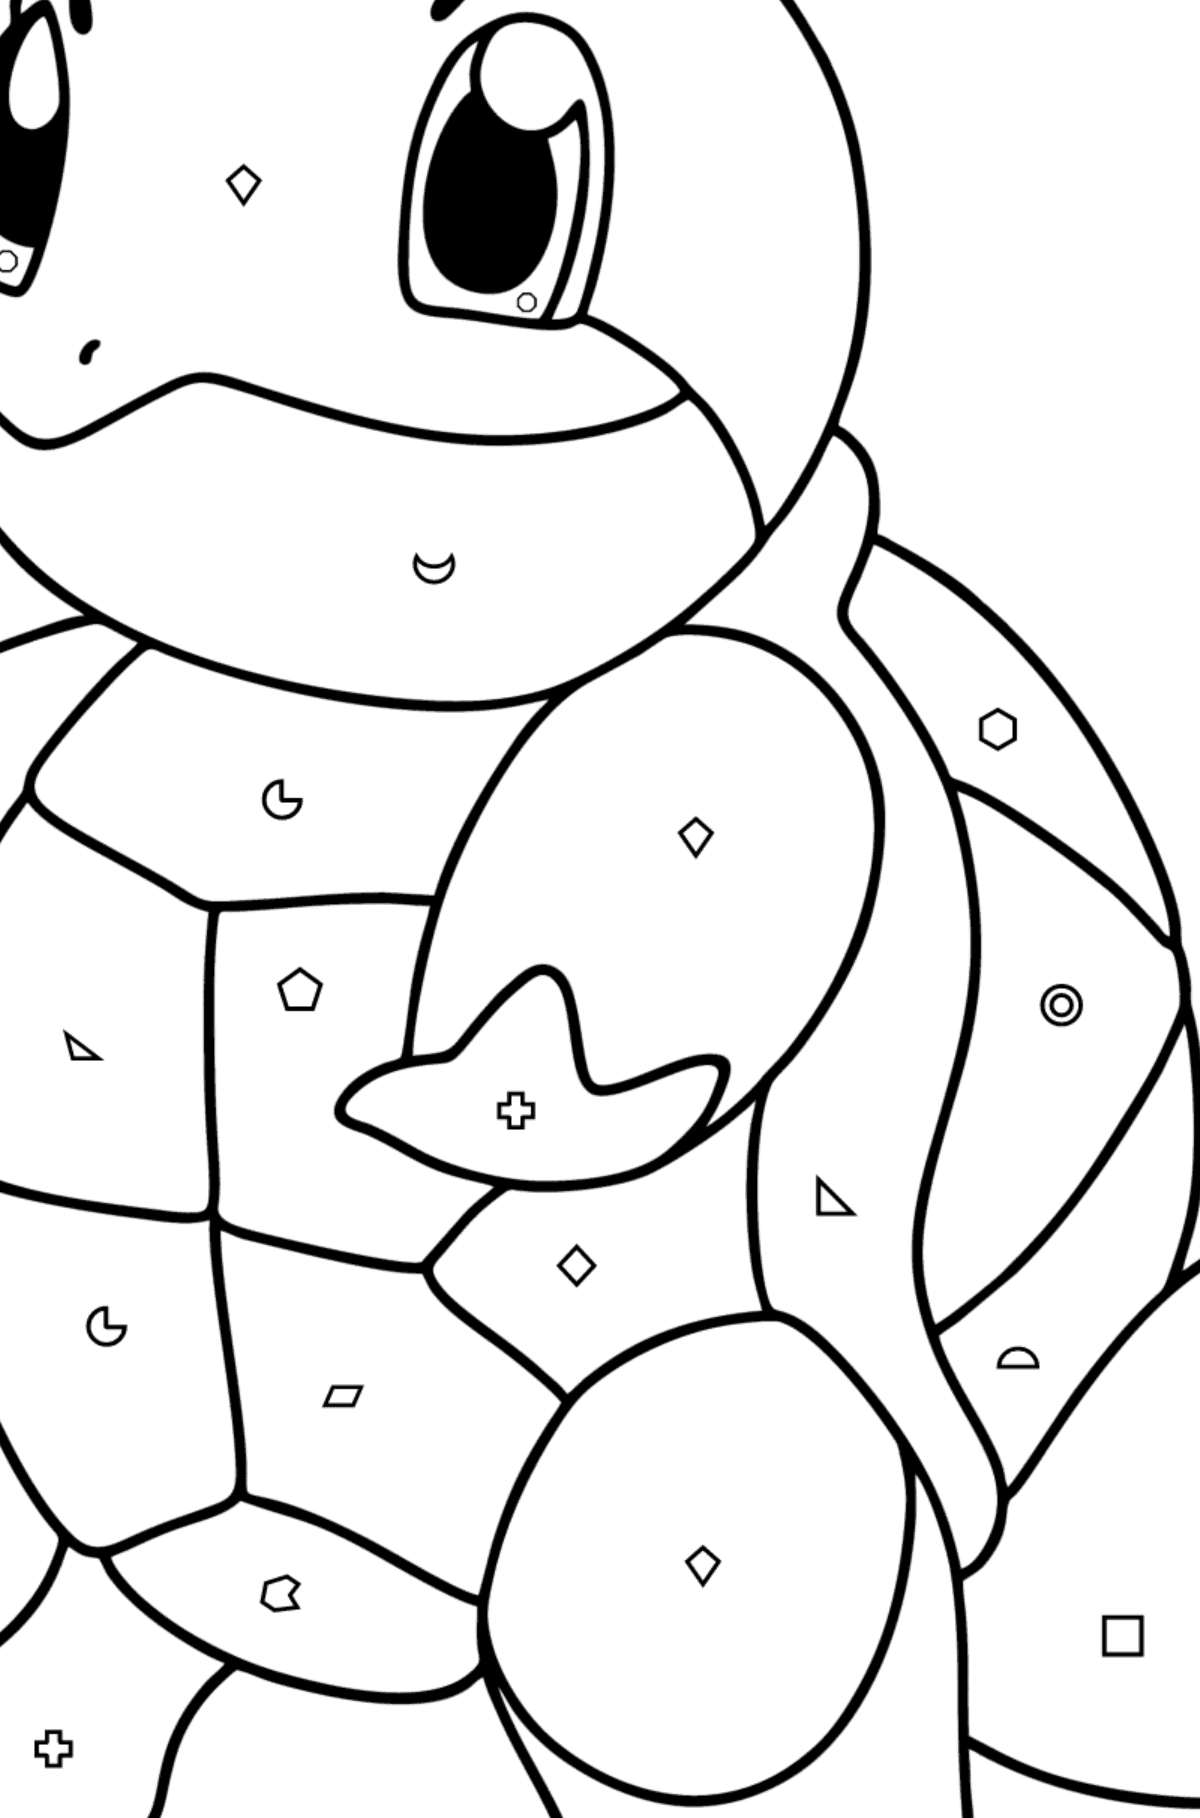 Coloring page Pokémon Go Squirtle - Coloring by Geometric Shapes for Kids